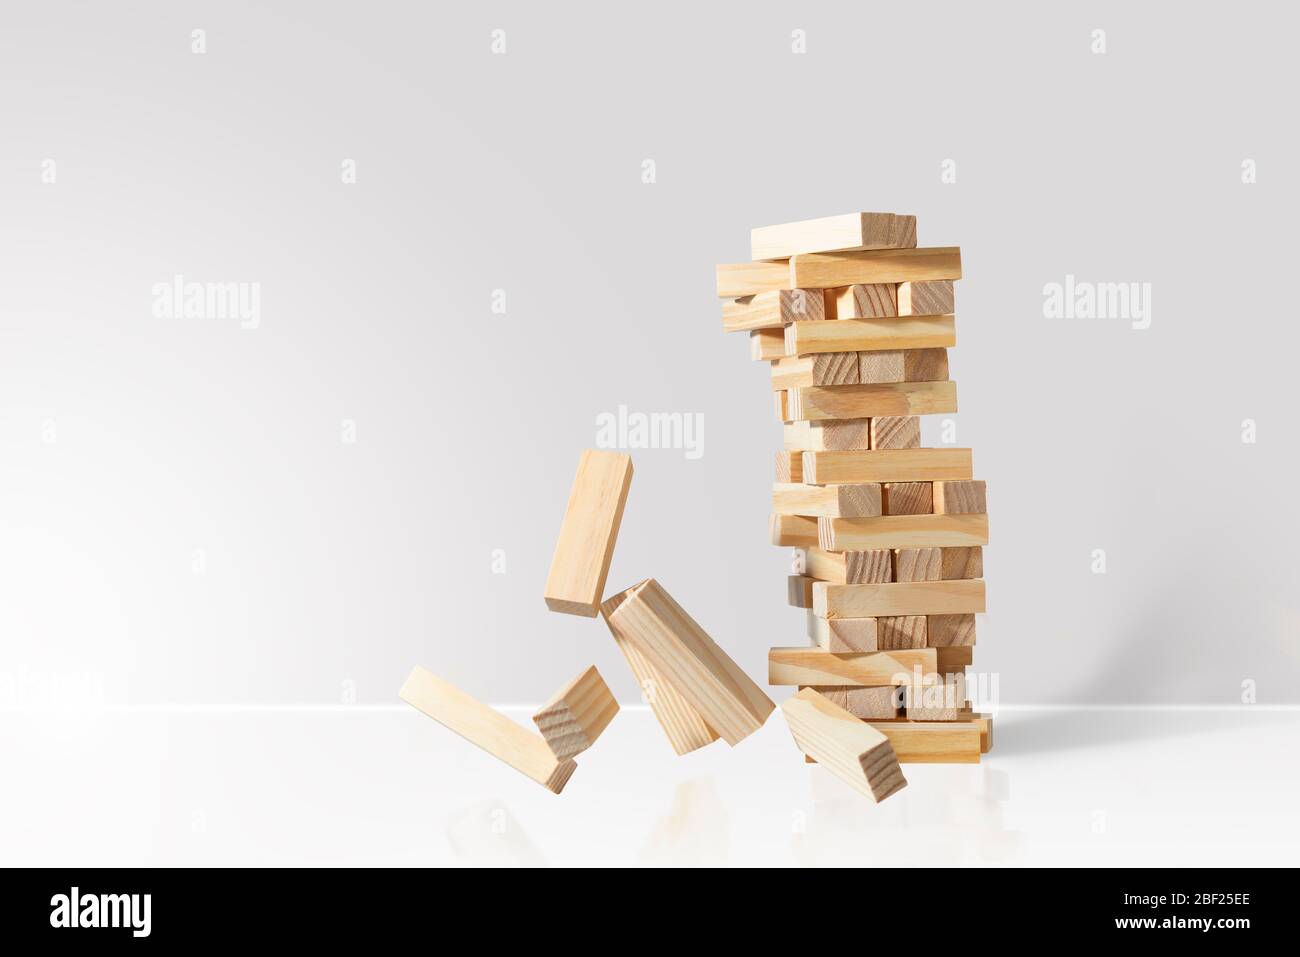 Wooden block tower game collapses isolated on white background with copy space Stock Photo